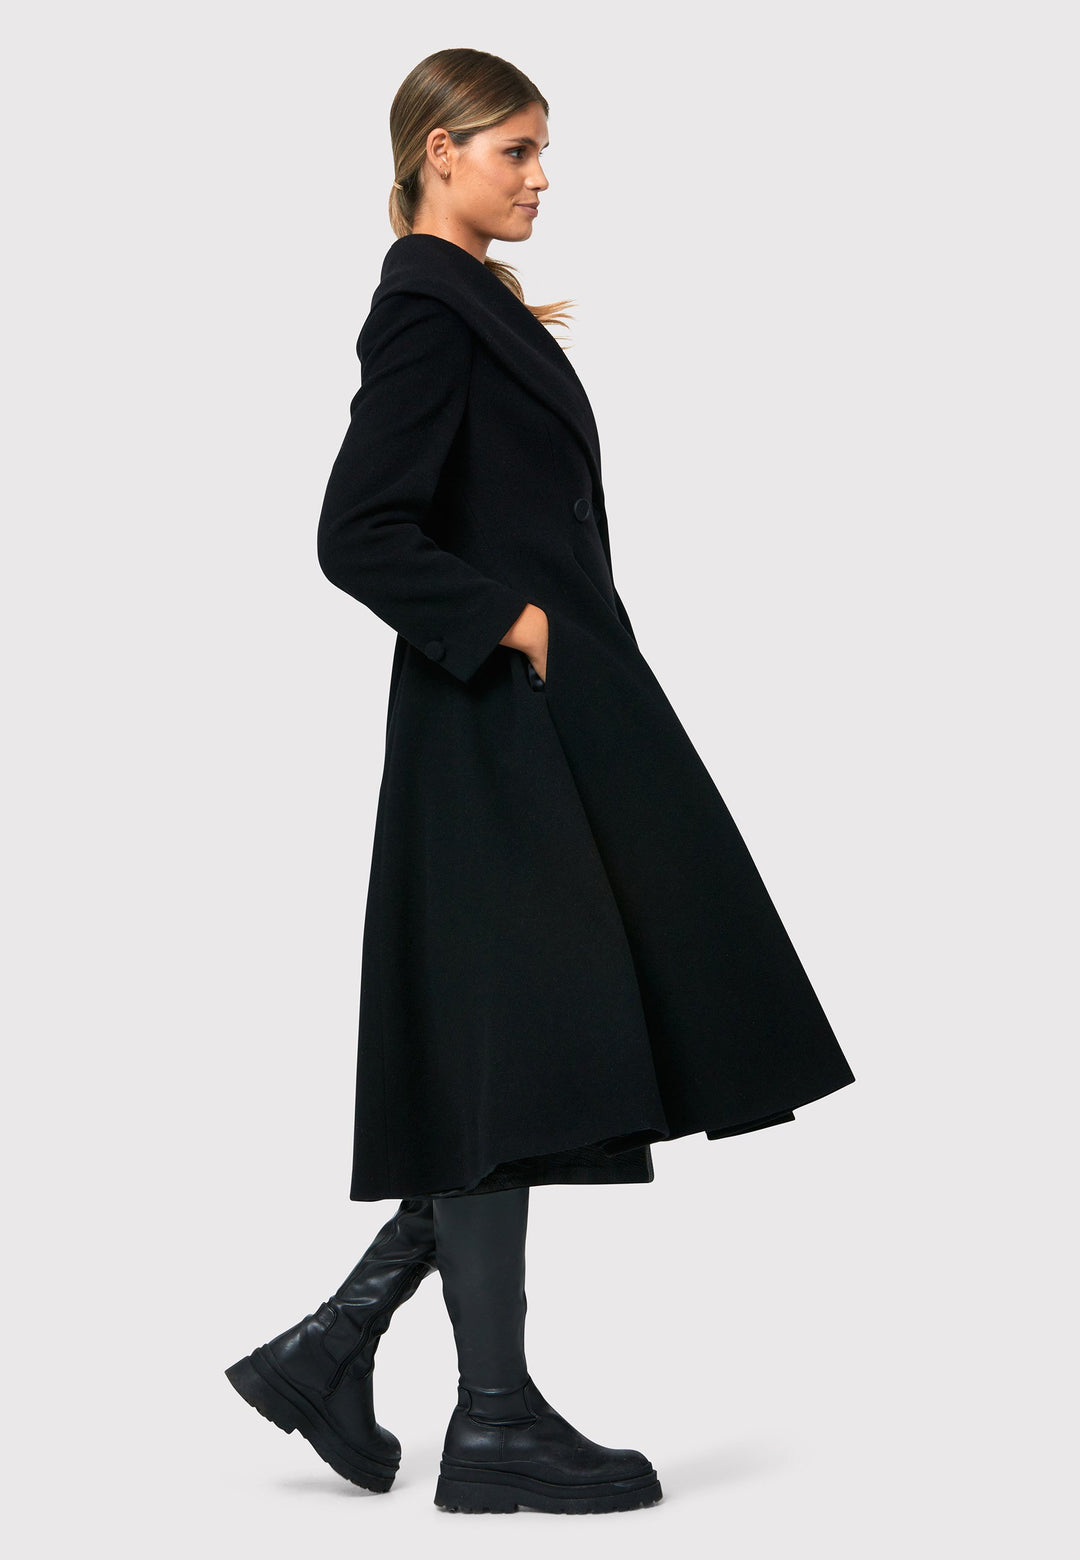 Step into 50s glamour with the Scarlett Black Coat, a captivating outerwear crafted from a wool and cashmere blend melton. This fit & flare silhouette boasts an oversized shawl collar, cinched waist, and convenient side seam pockets. Perfect for winter weddings or any occasion where you desire a touch of glamour and warmth, the Scarlett Black Coat combines style and functionality in one stunning piece.